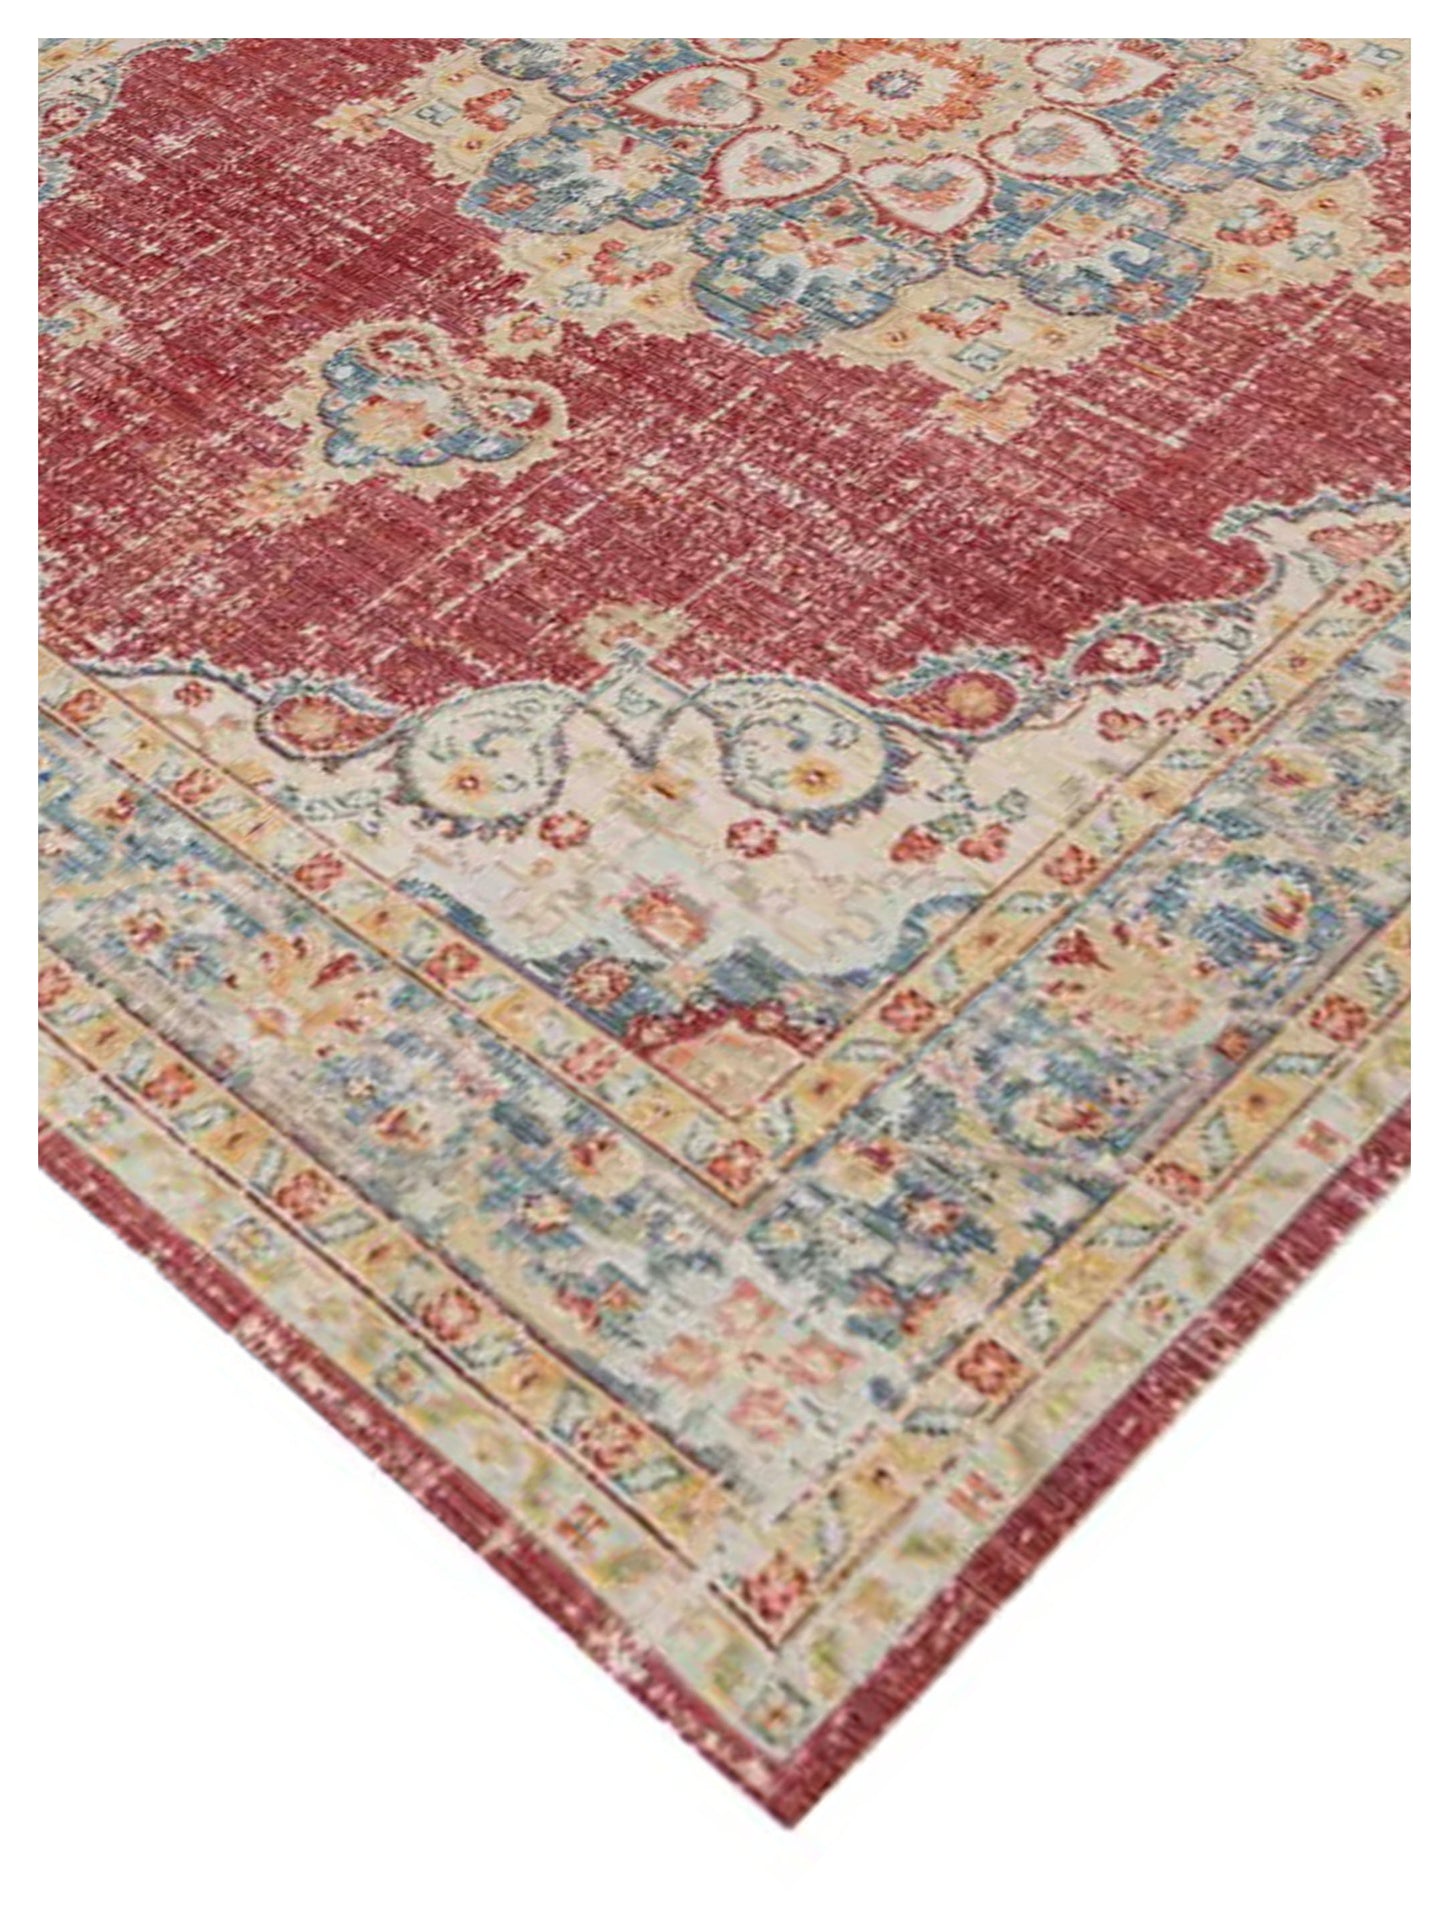 Limited Odeya OR-807 BURGUNDY RED TEAL Traditional Machinemade Rug